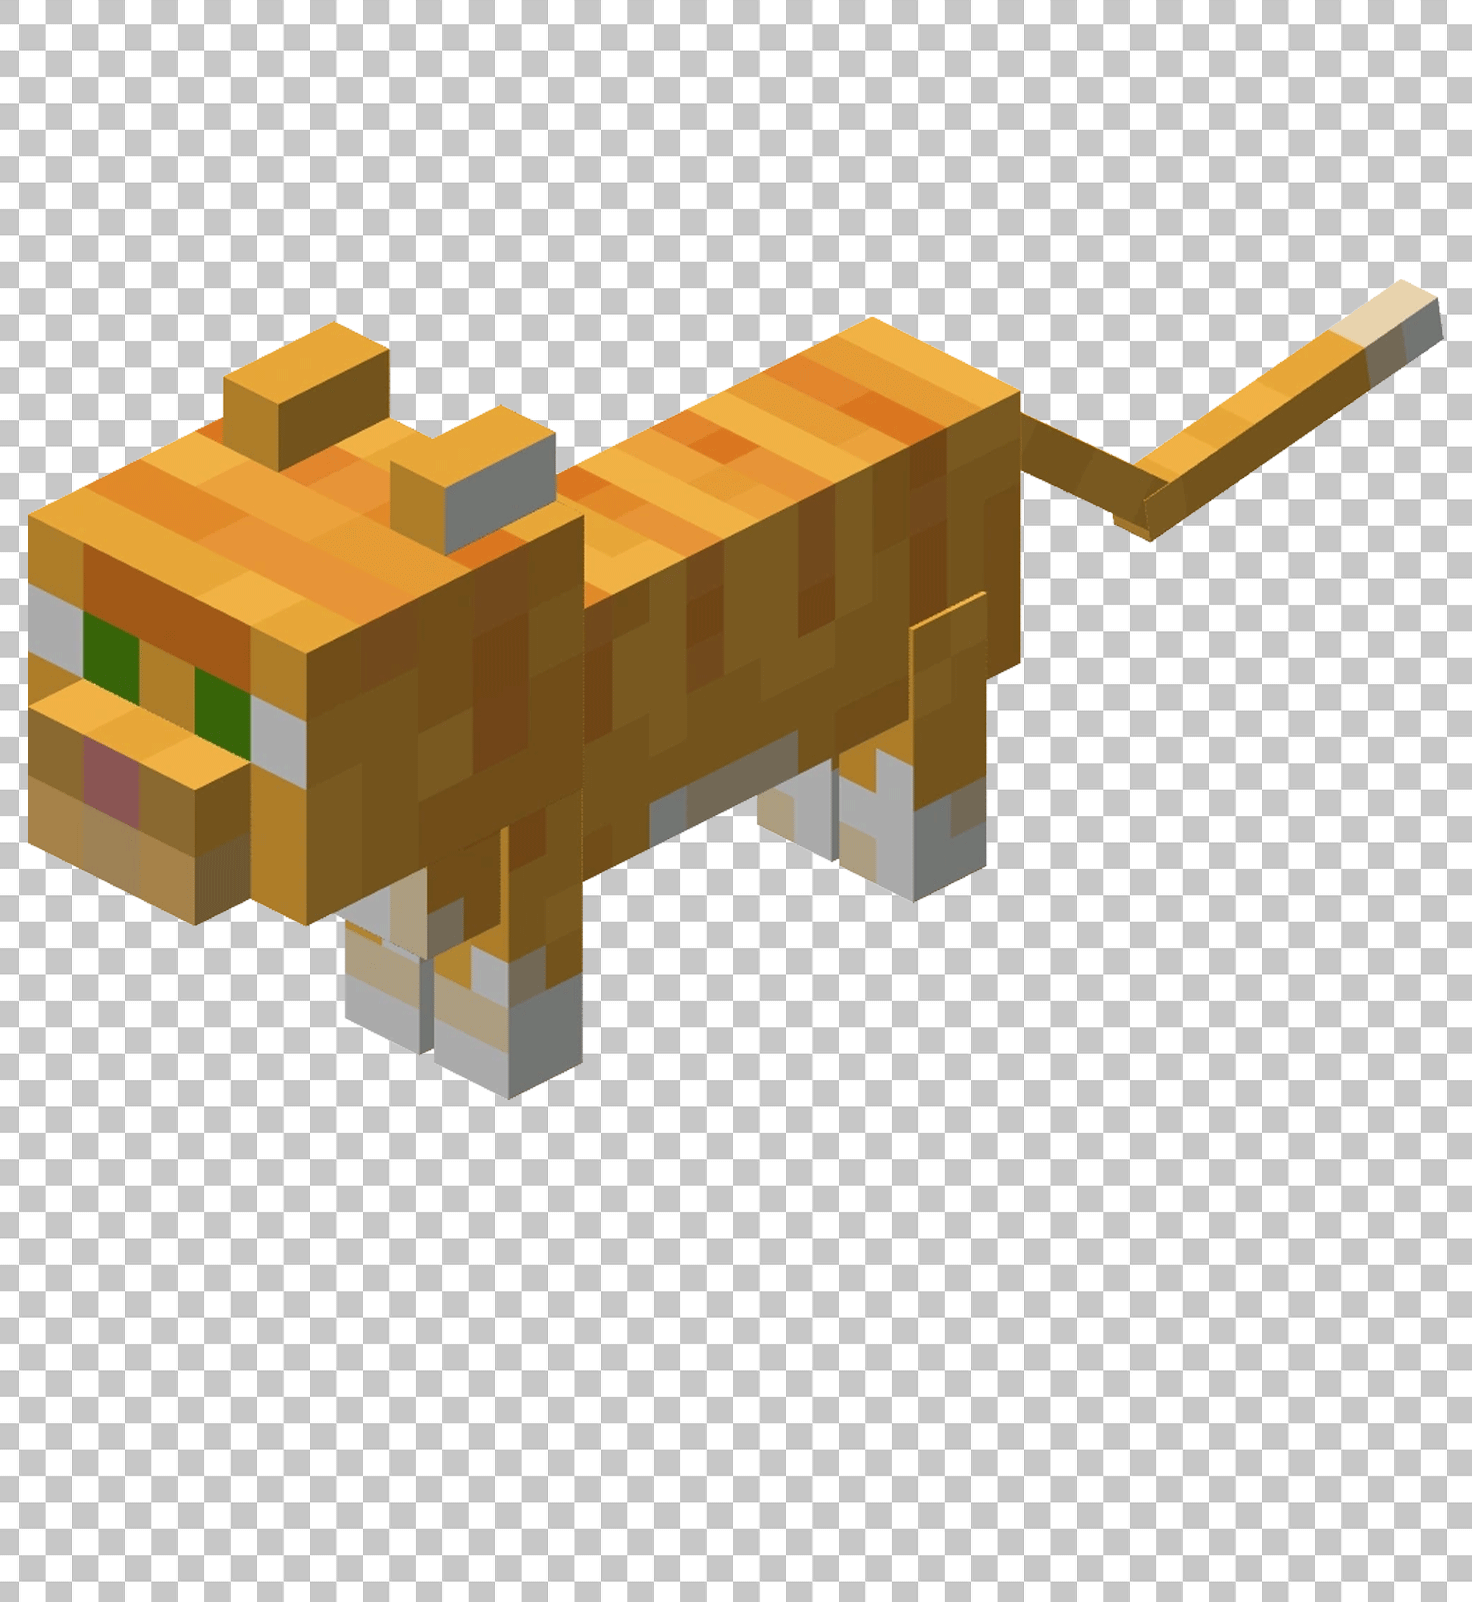 Minecraft Yellow Cat PNG Image